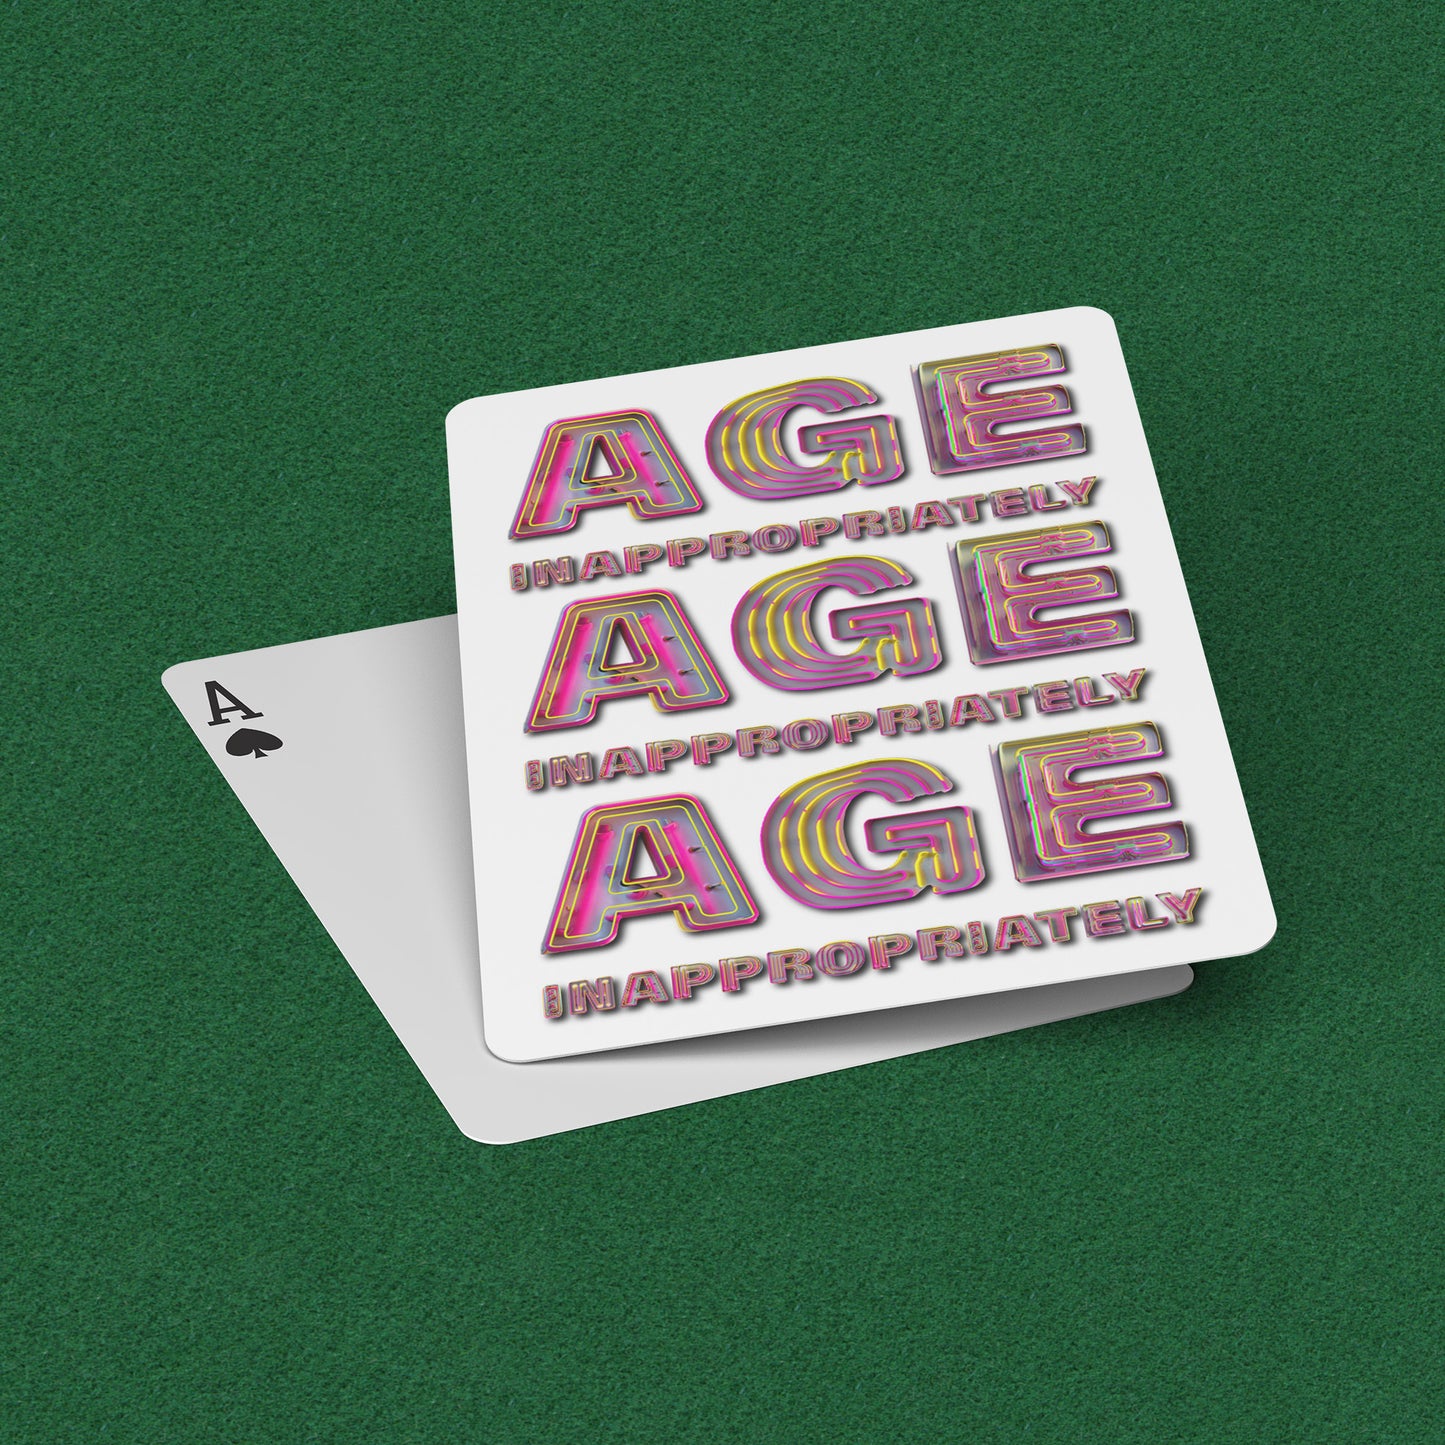 Age Inappropriately Playing Cards